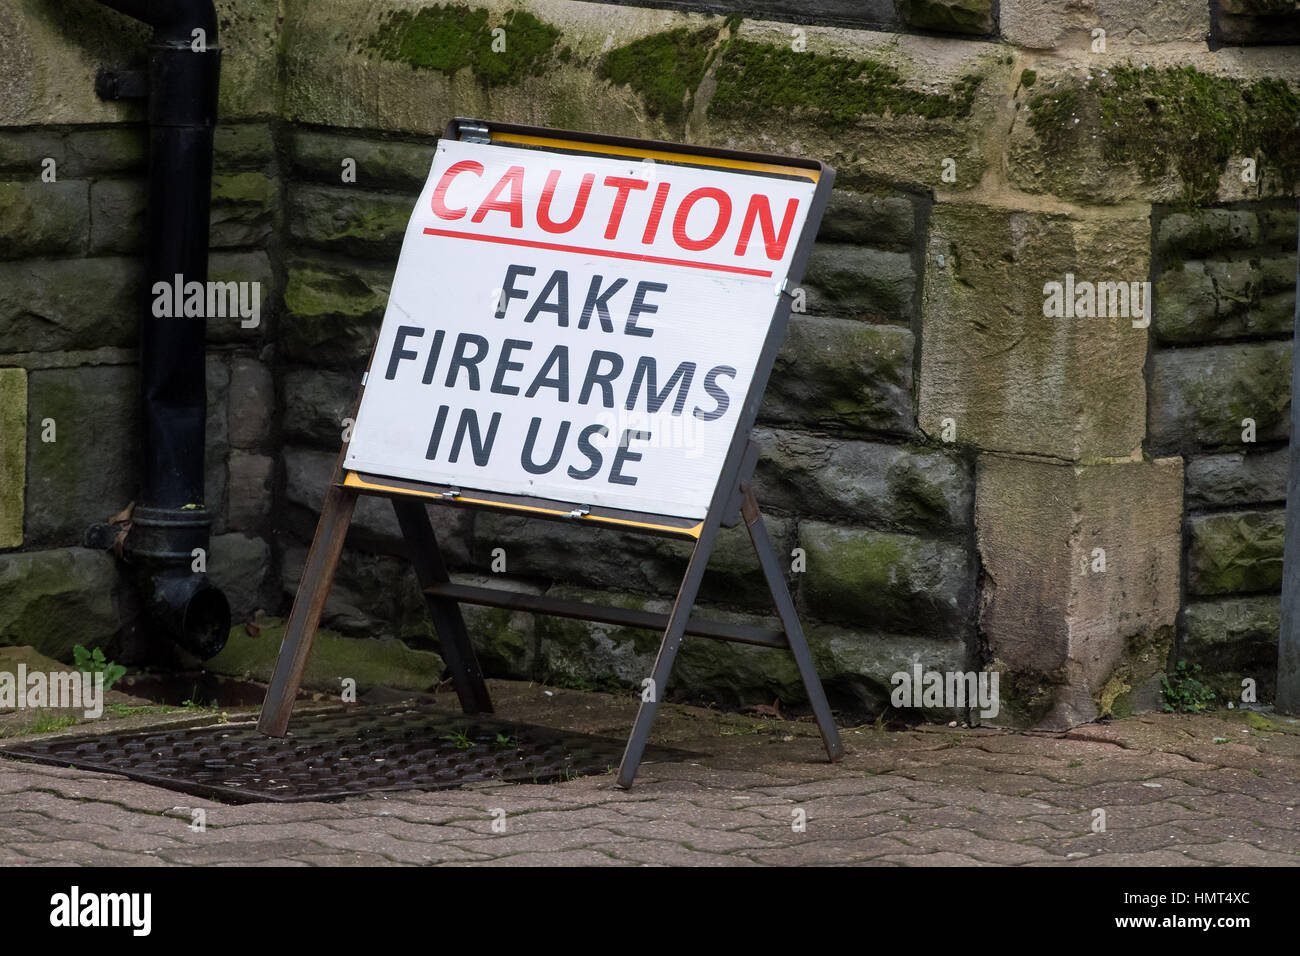 A sign warning people of fake firearm use during Doctor Who filming on Mount Stuart Square in Cardiff Bay, UK Stock Photo